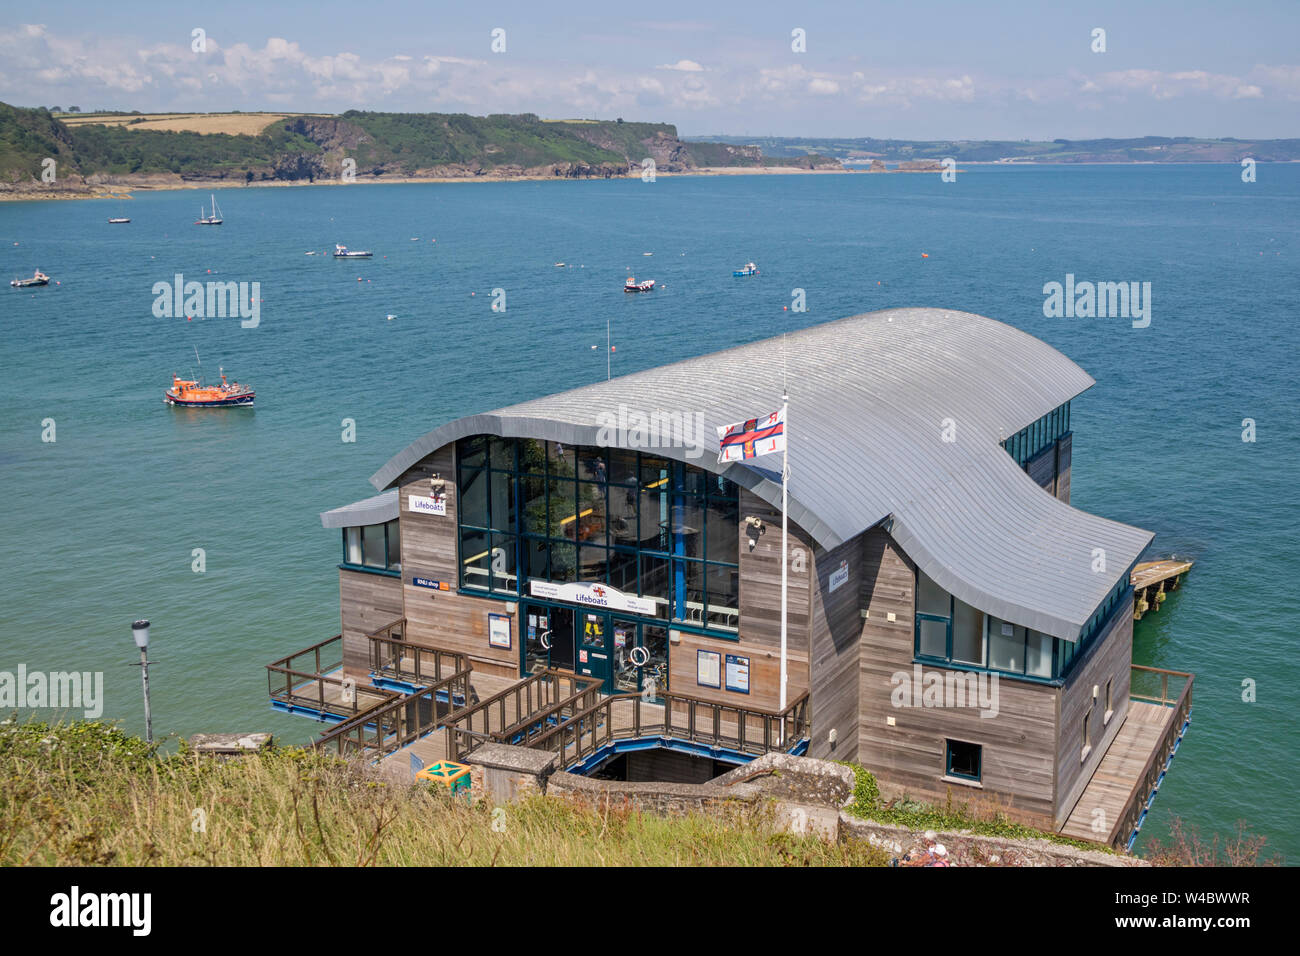 The RNLI lifeboat station in the Welsh coastal town of Tenby, Pembrokeshire, Wales, UK Stock Photo